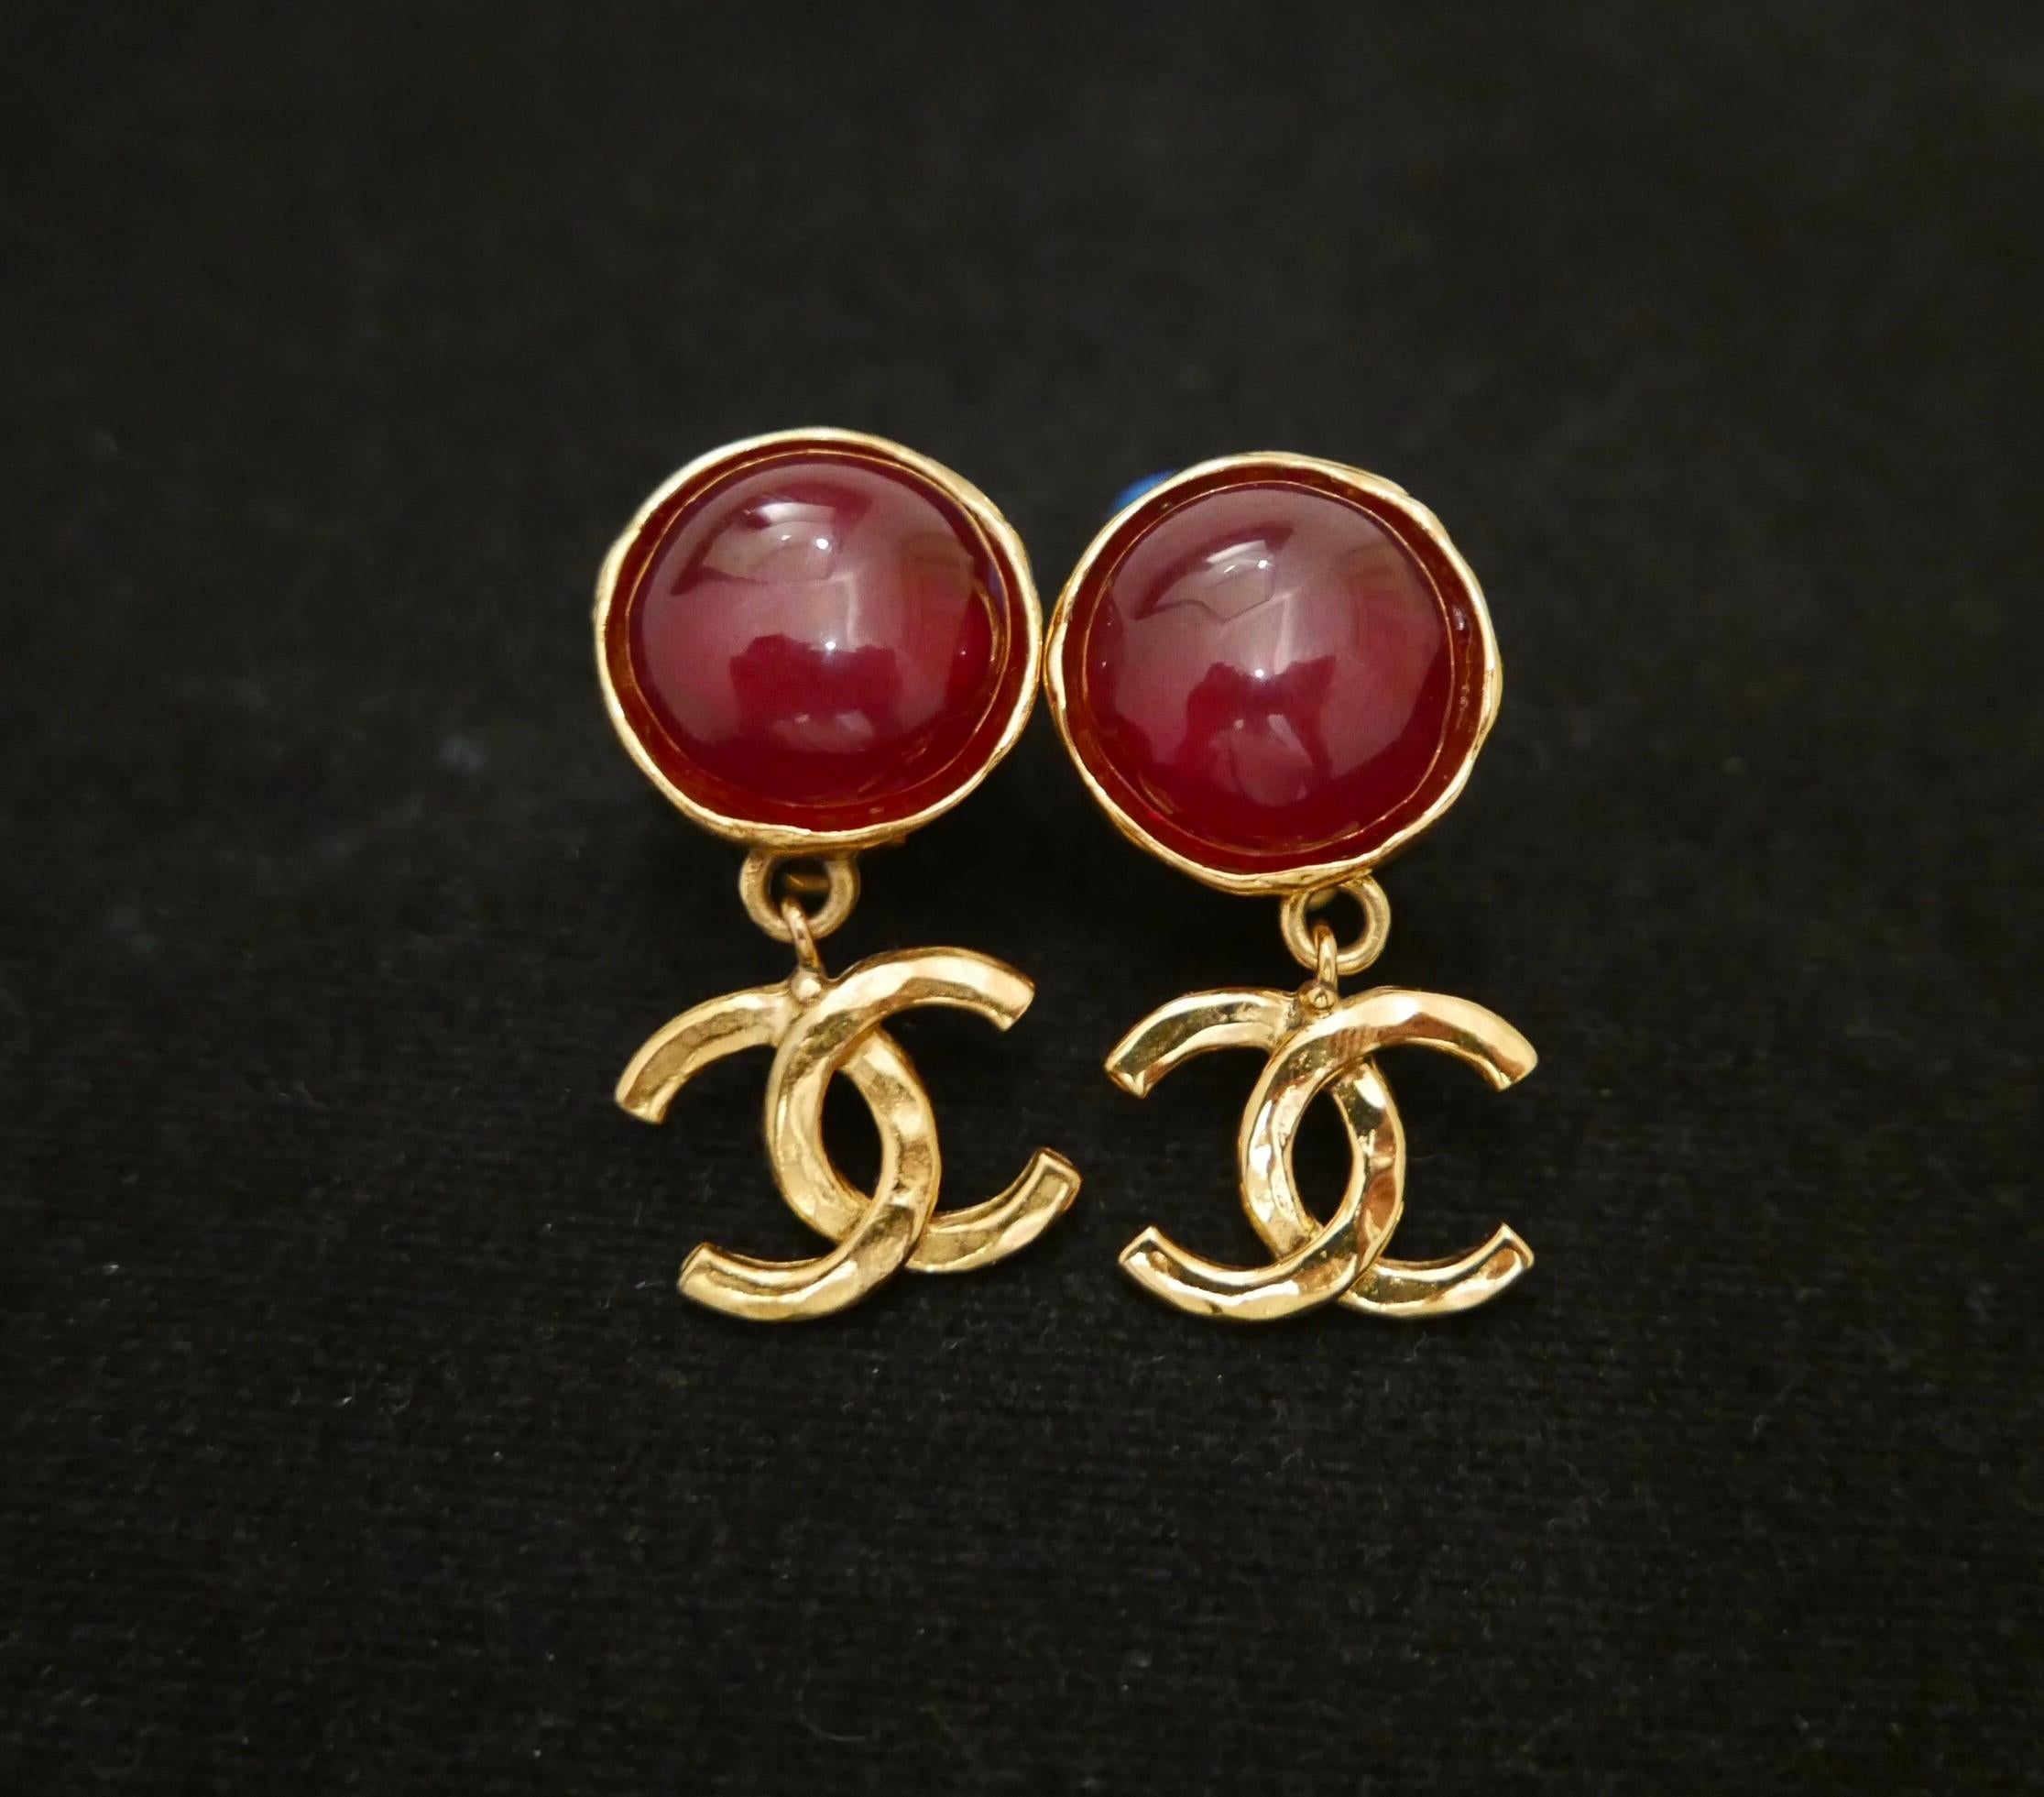 Pair of 1990s Chanel gold toned earclips featuring a red gripoix hemisphere adorned with a dangle gold toned CC logo. Measures approximately 4.4 x 2.2cm. Stamped Chanel 95P, made in France. Clip on style. Comes with box. 

Condition: Minor signs of